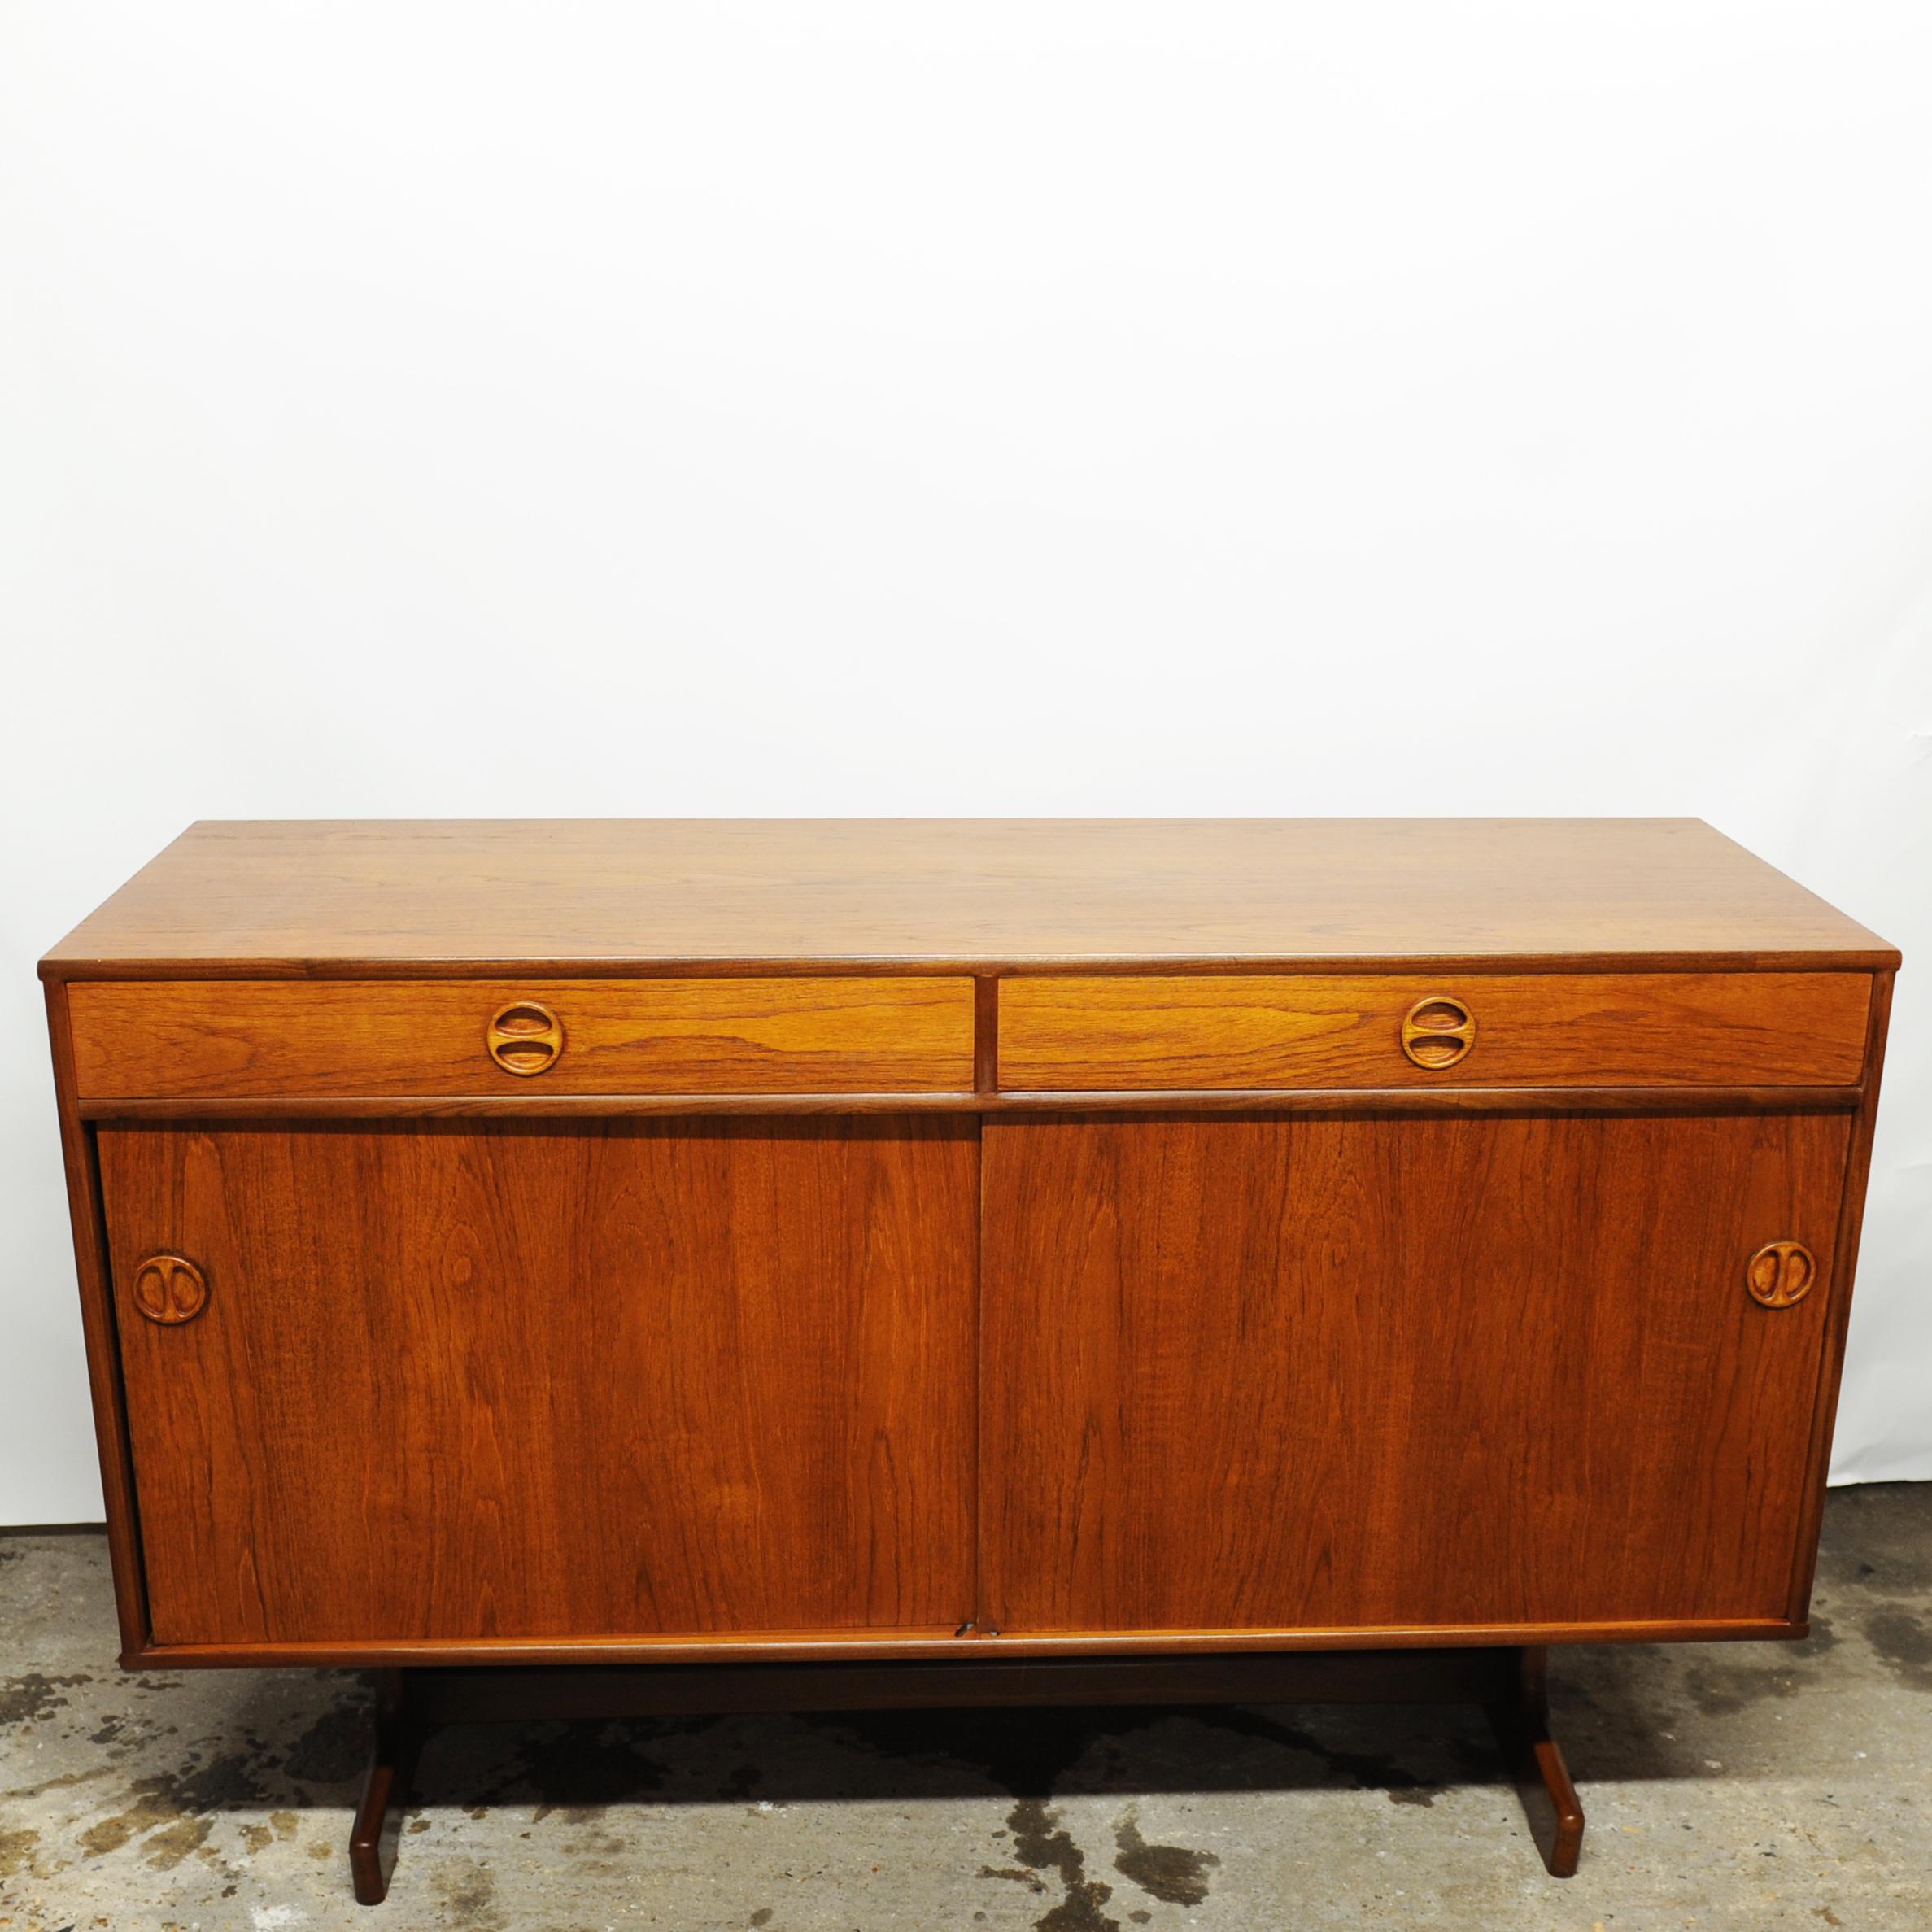 Late 20th Century Vintage Teak Short Sideboard with Circular Handles, 1970s For Sale